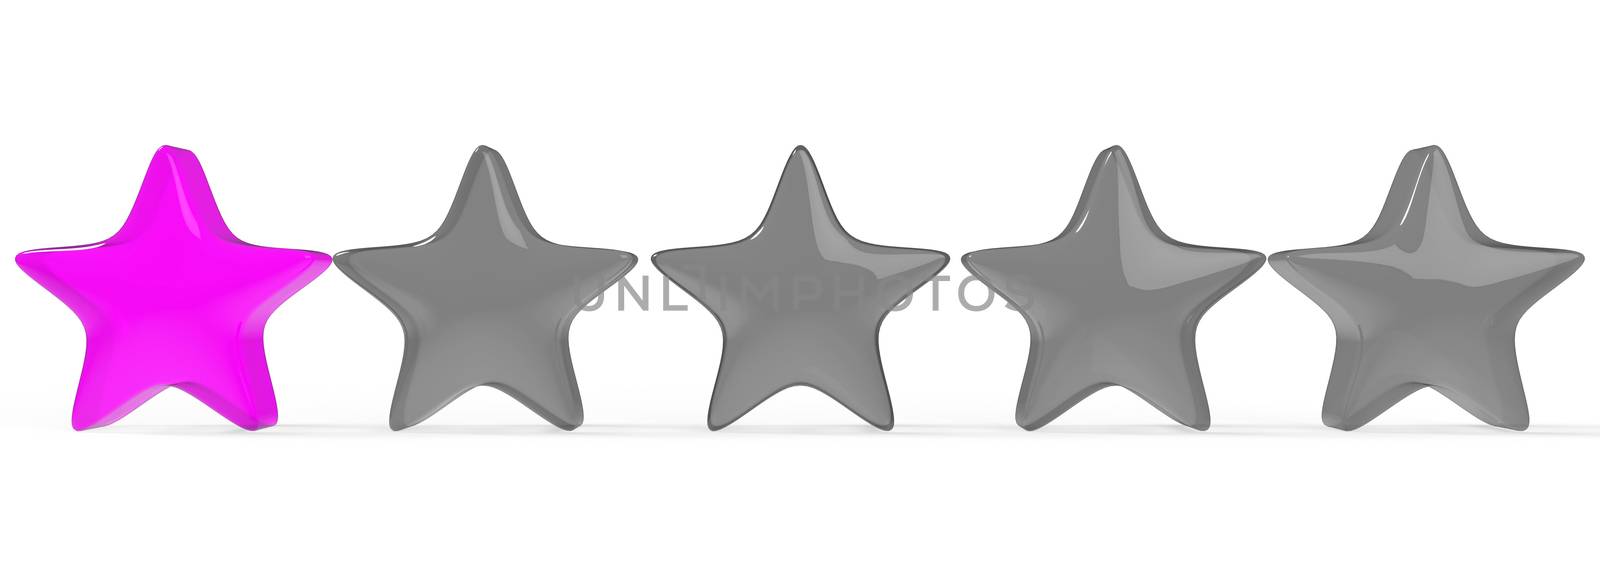 3d one purple star on color background. Render and illustration of golden star for premium